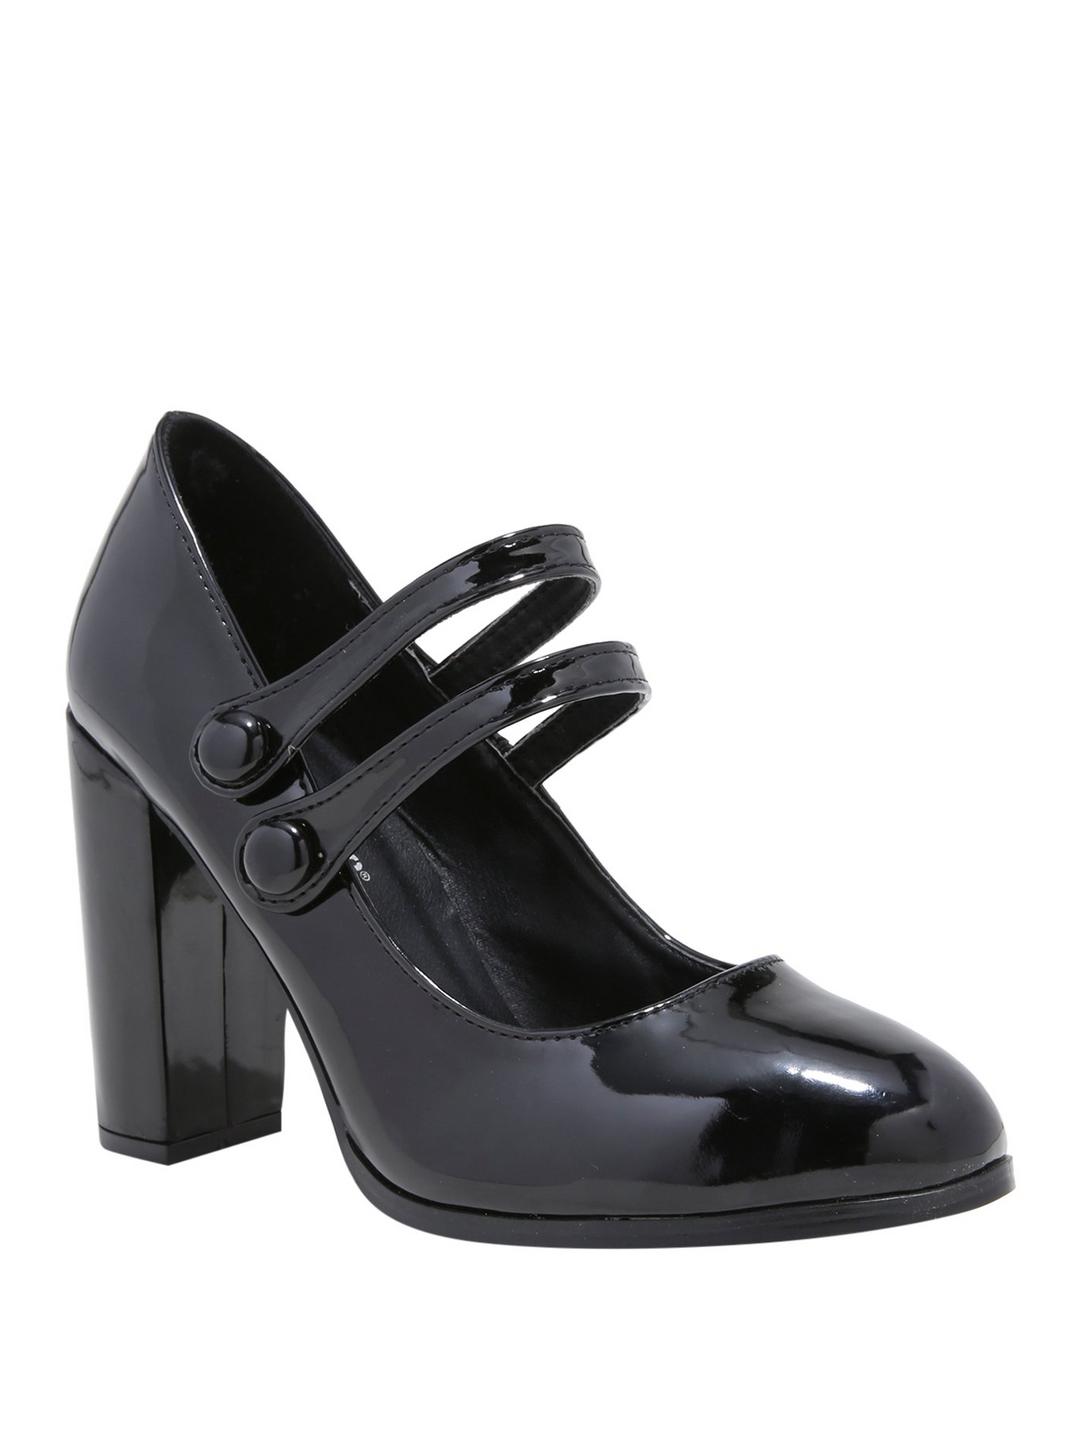 Black Round Toe Patent Leather Double Strap Mary Jane Heels, BLACK, hi-res